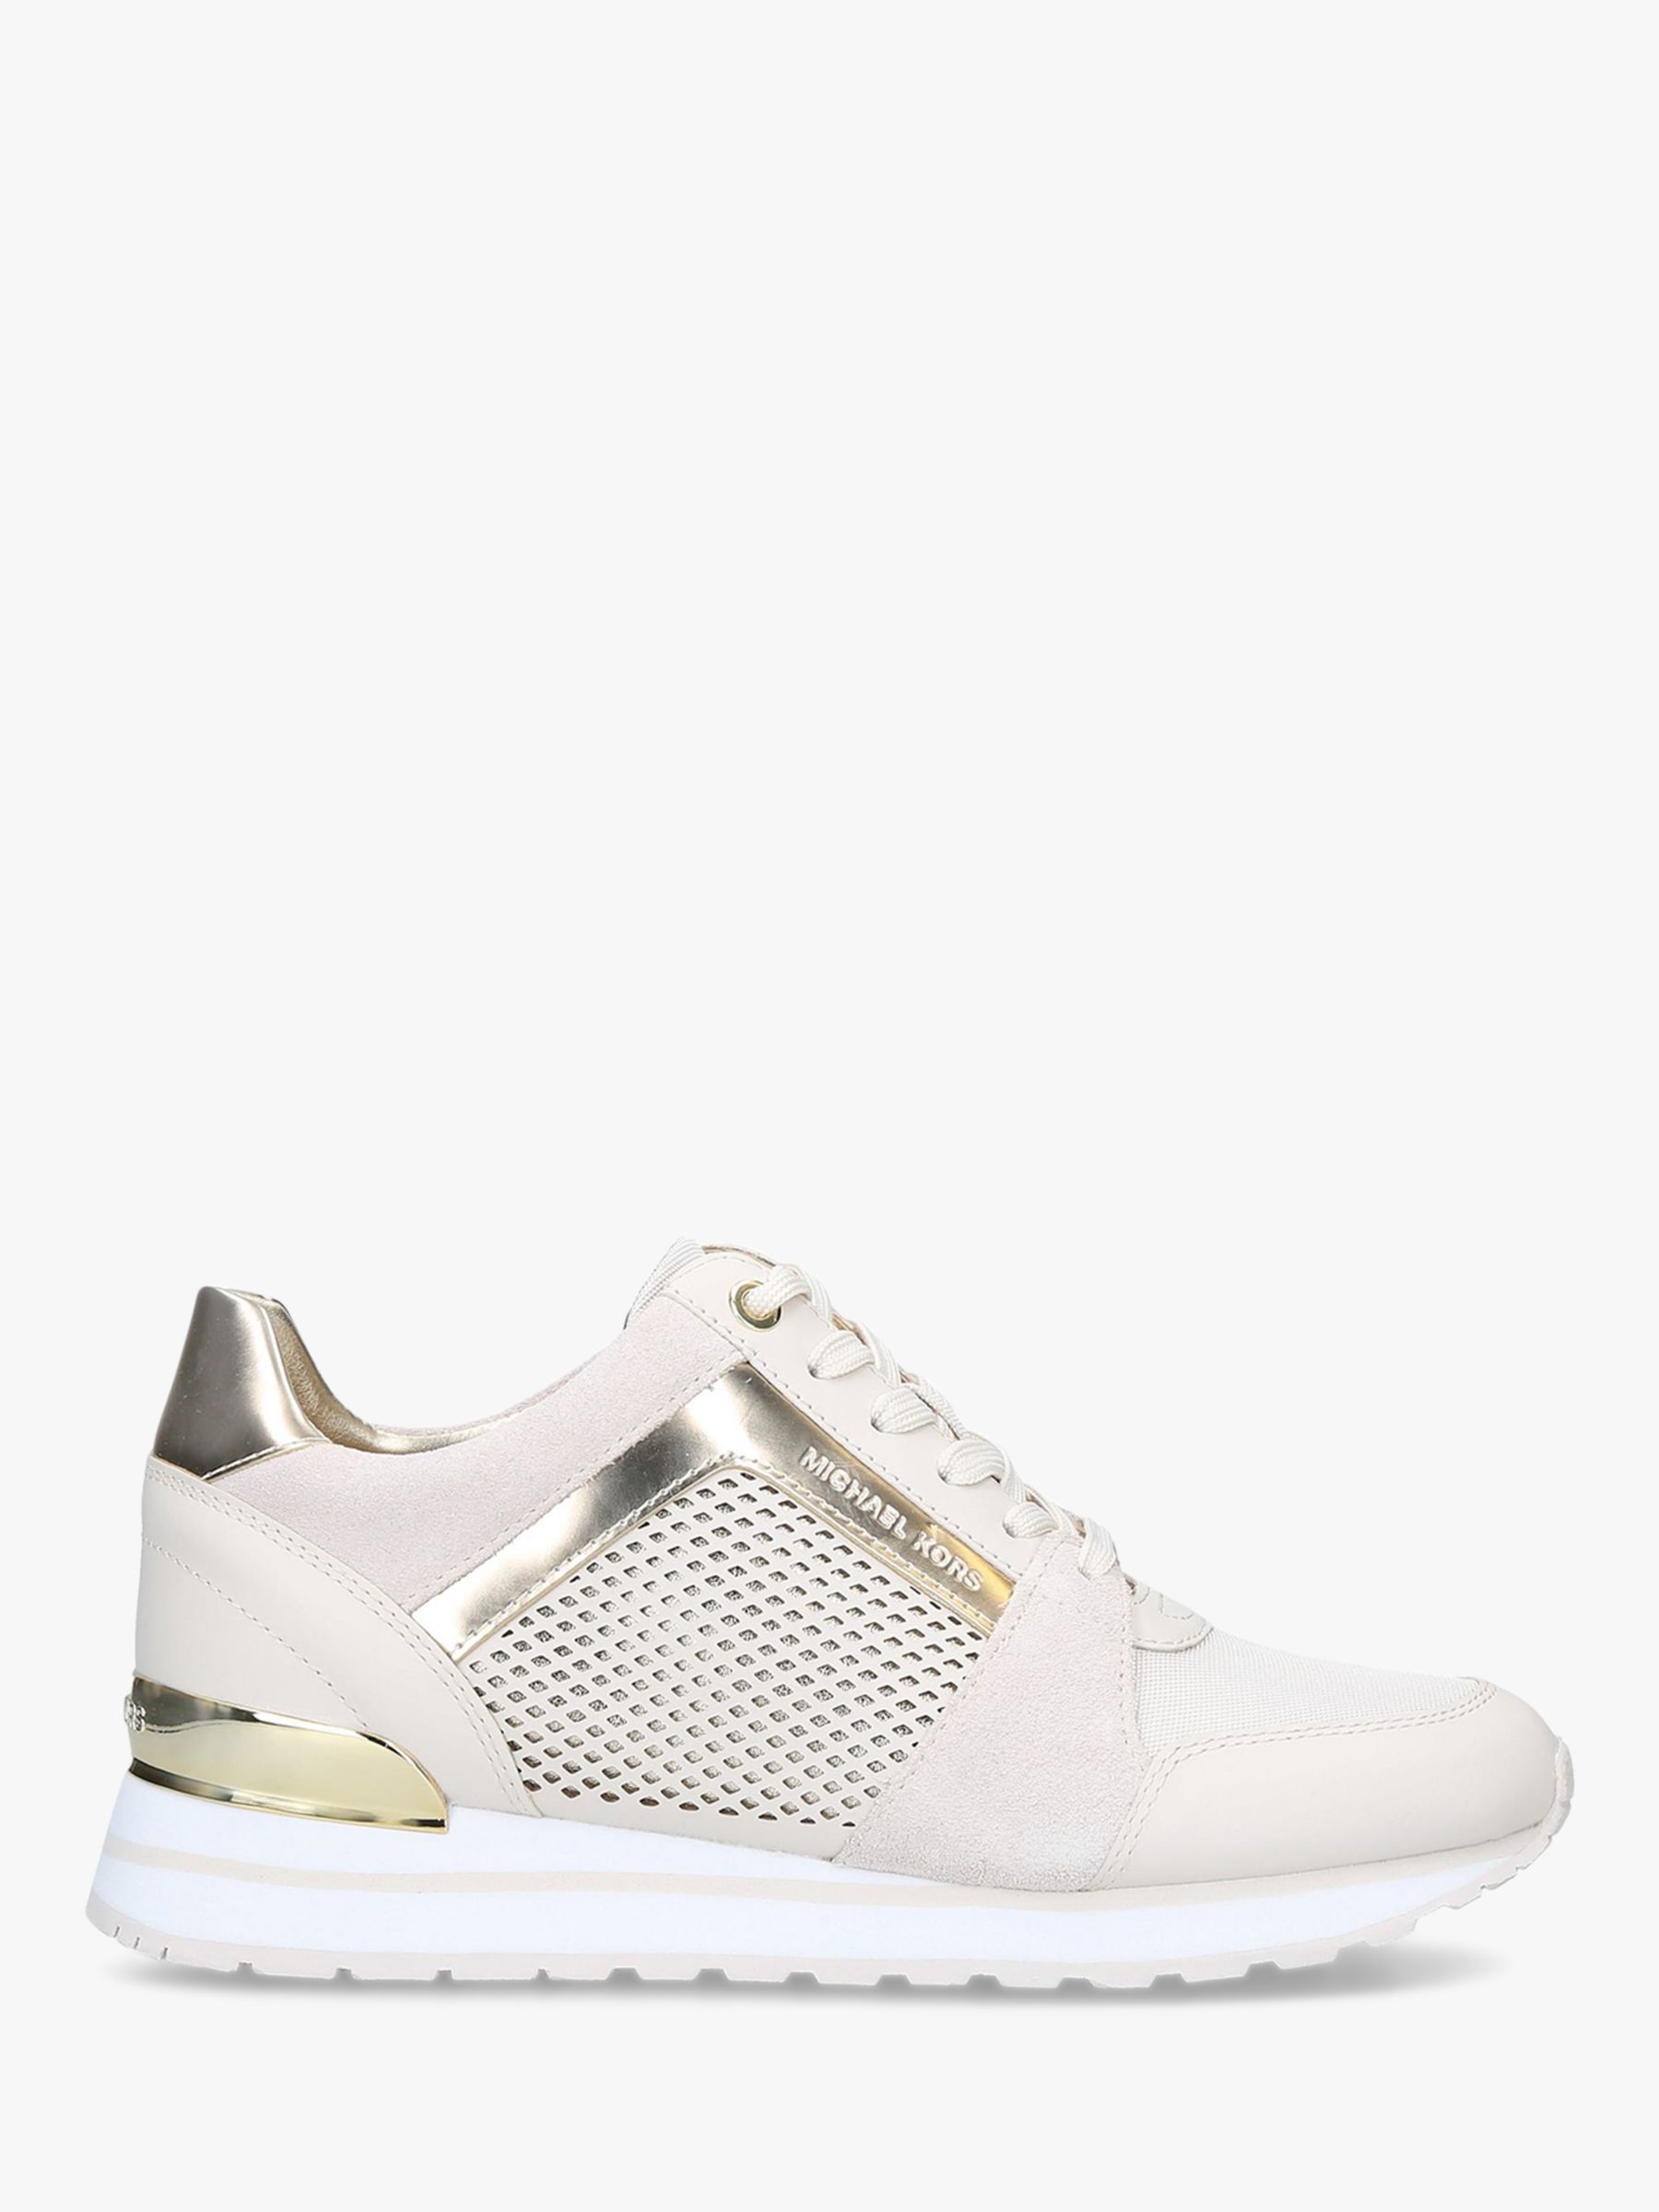 house of fraser michael kors trainers